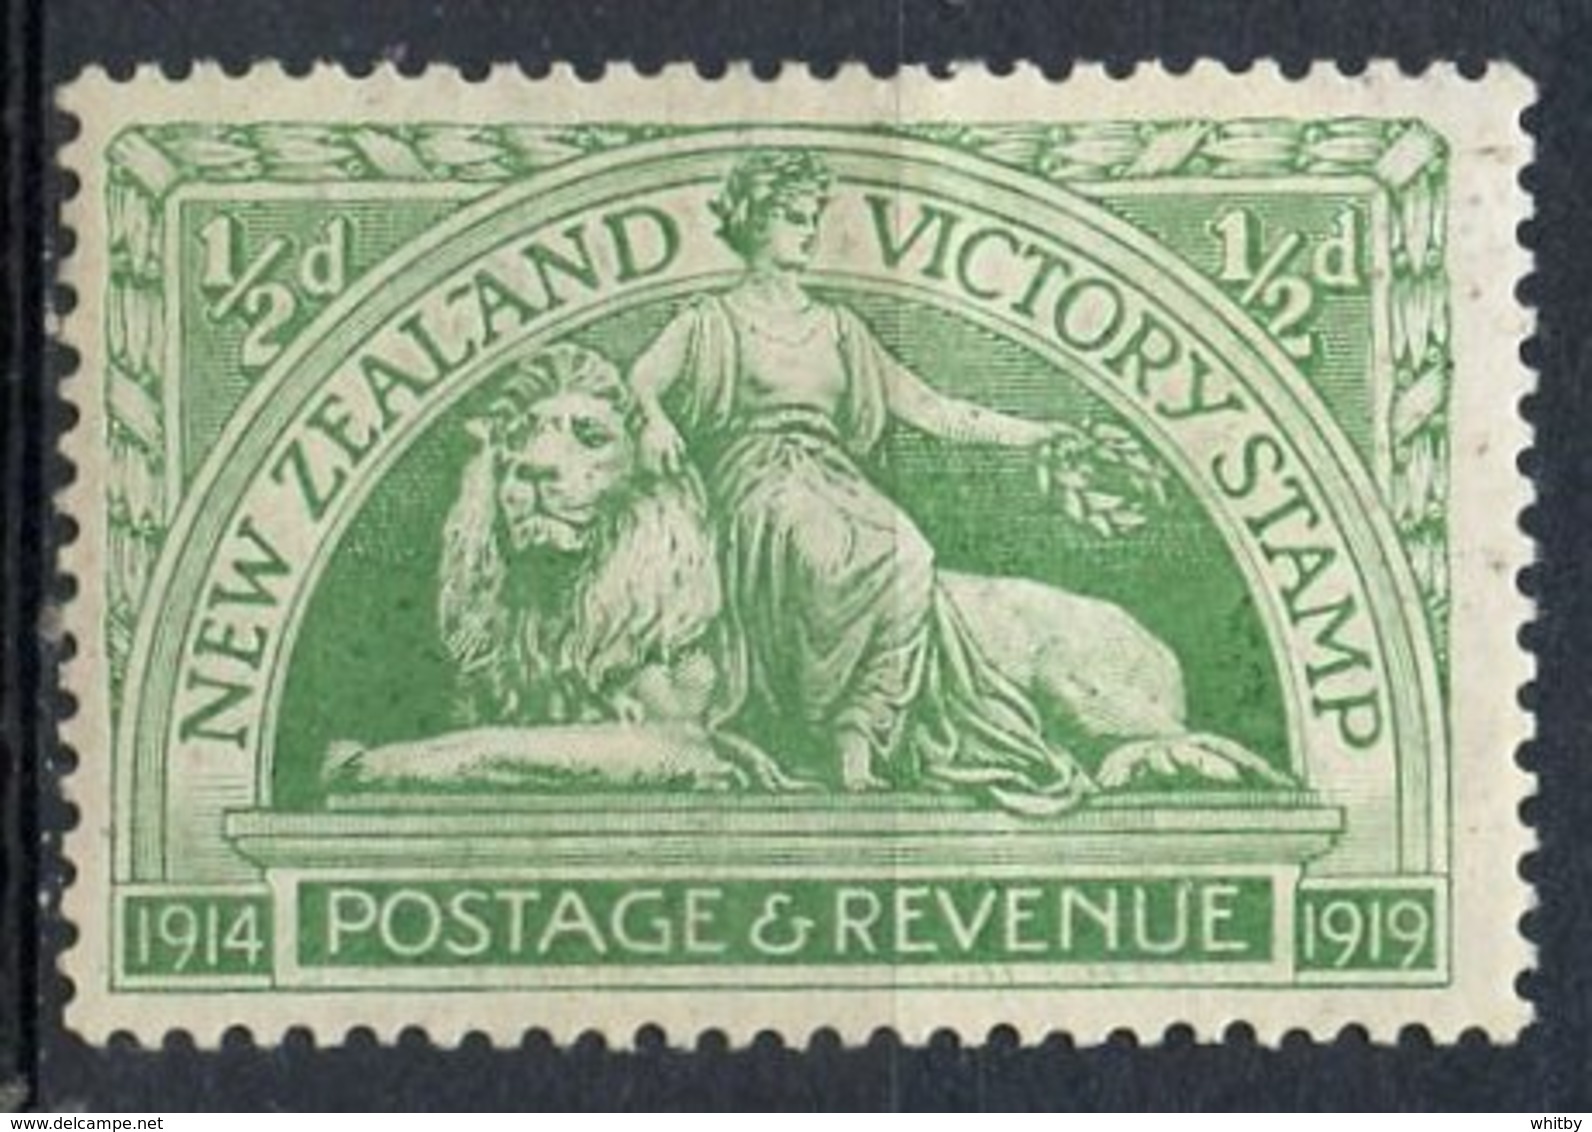 New Zealand 1920 1/2p Victory Stamp Issue #165  MH - Unused Stamps